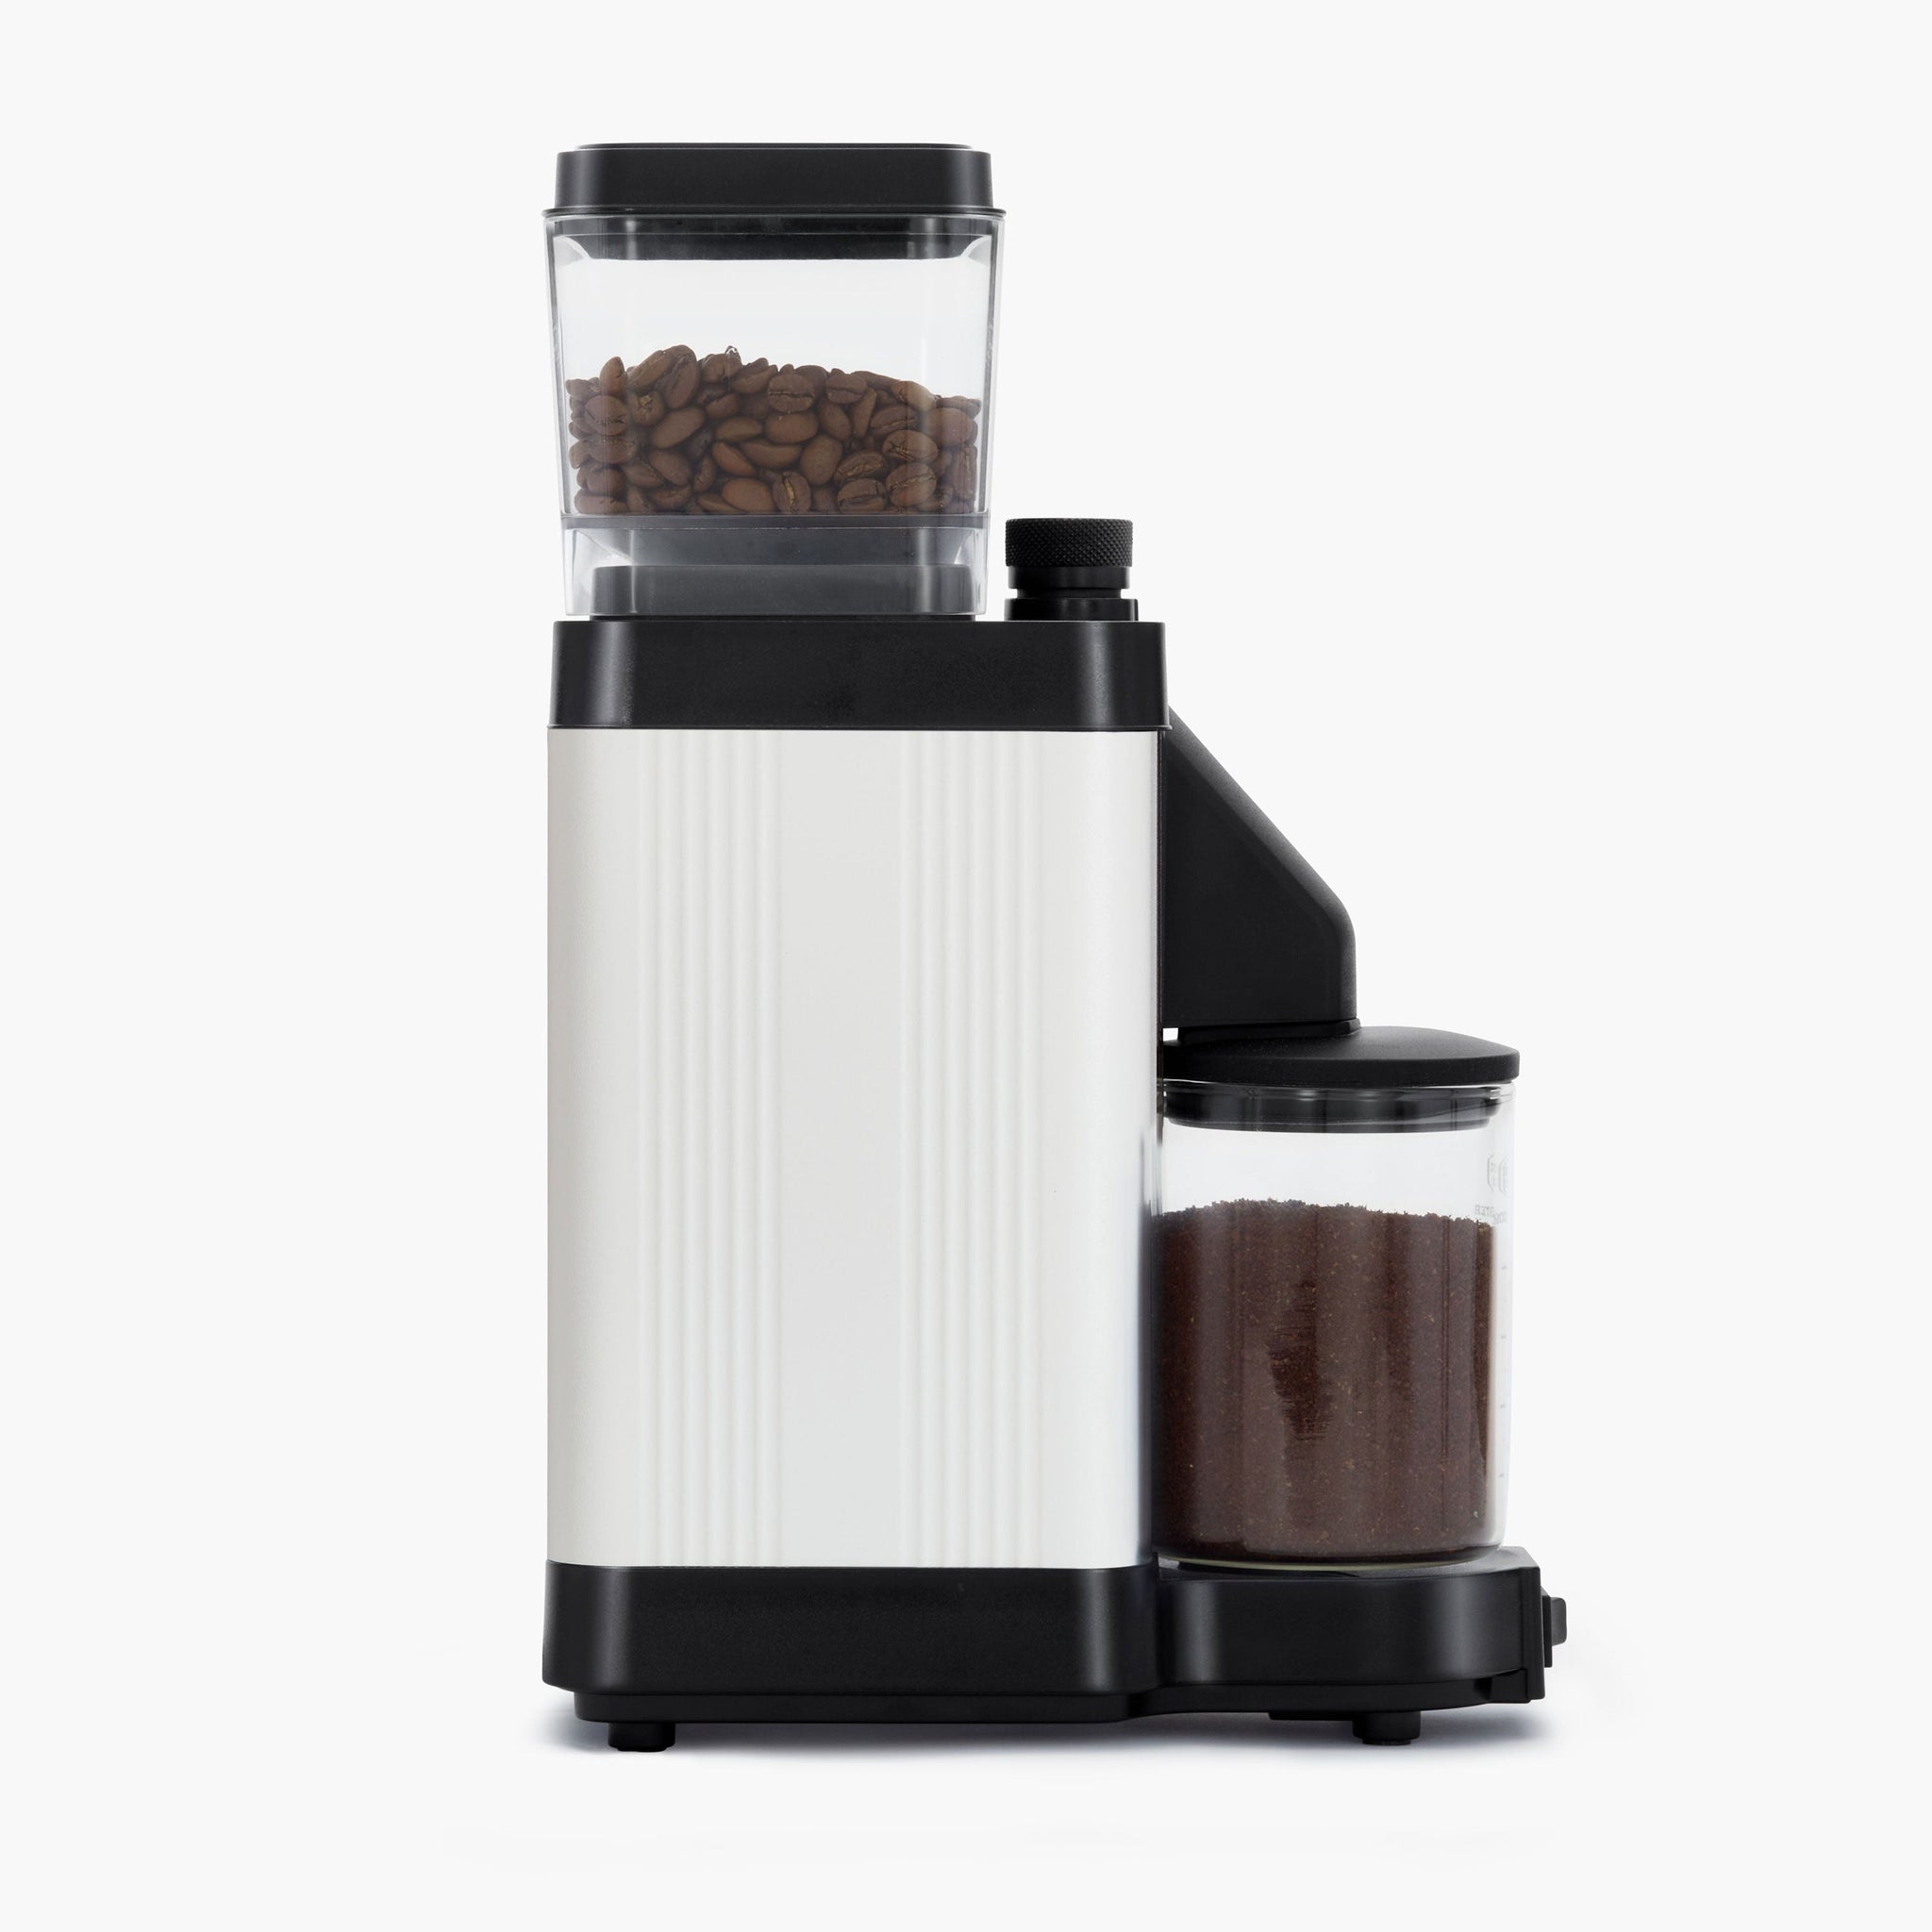 Cheap Budget Burr Coffee Grinder Review 